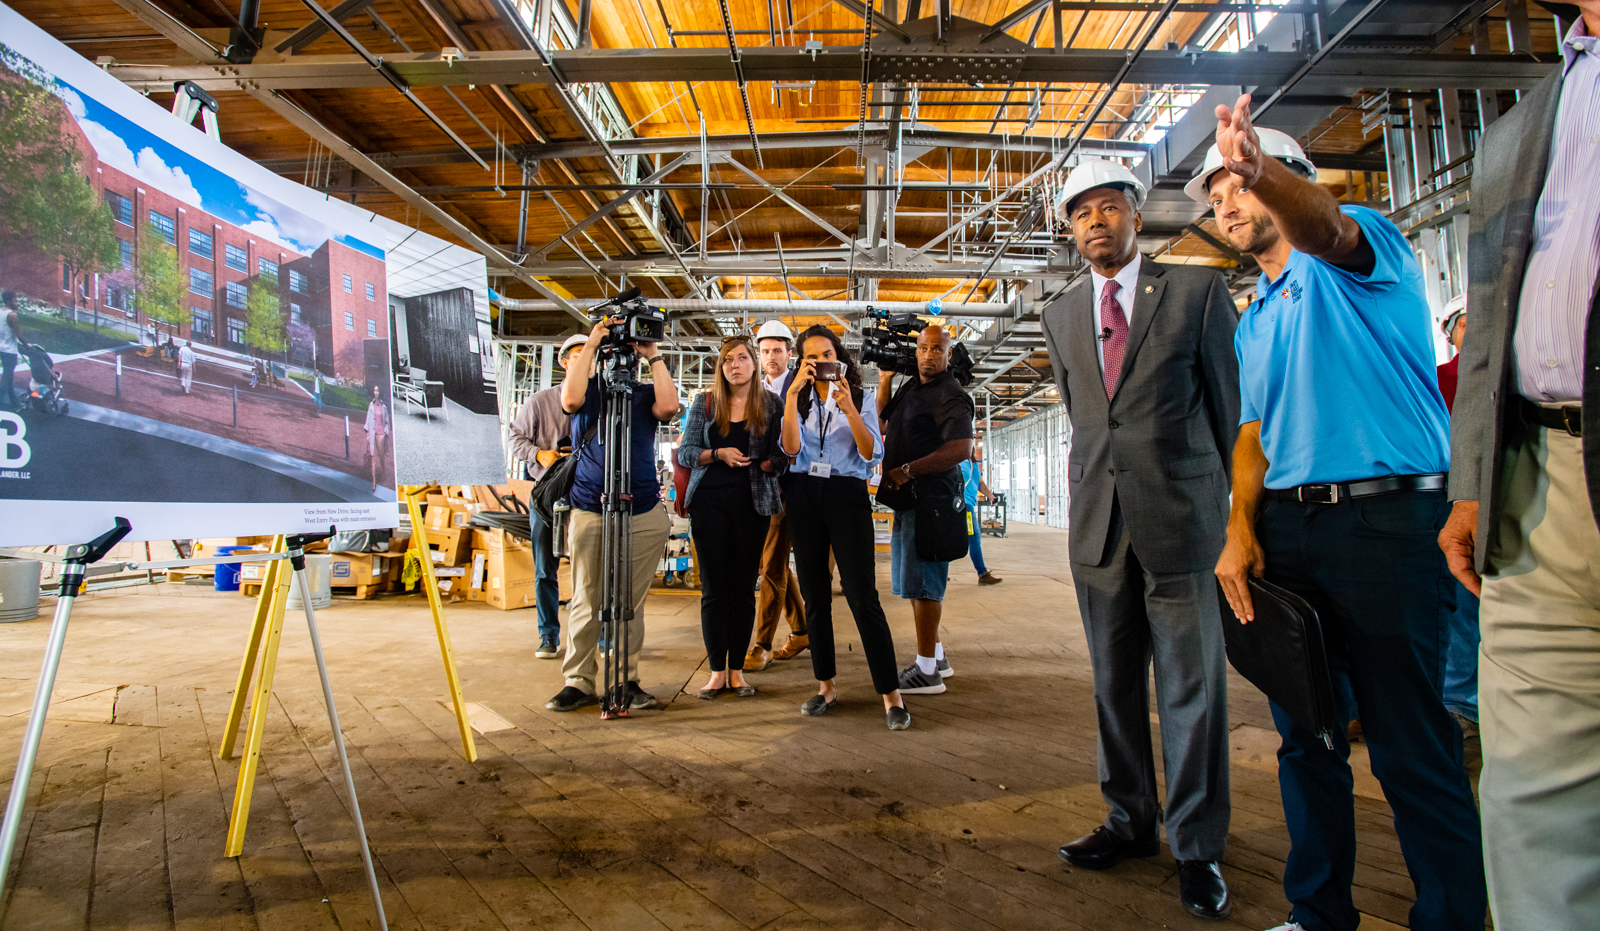 Secretary Carson visits an Opportunity Zone in Indianapolis, IN